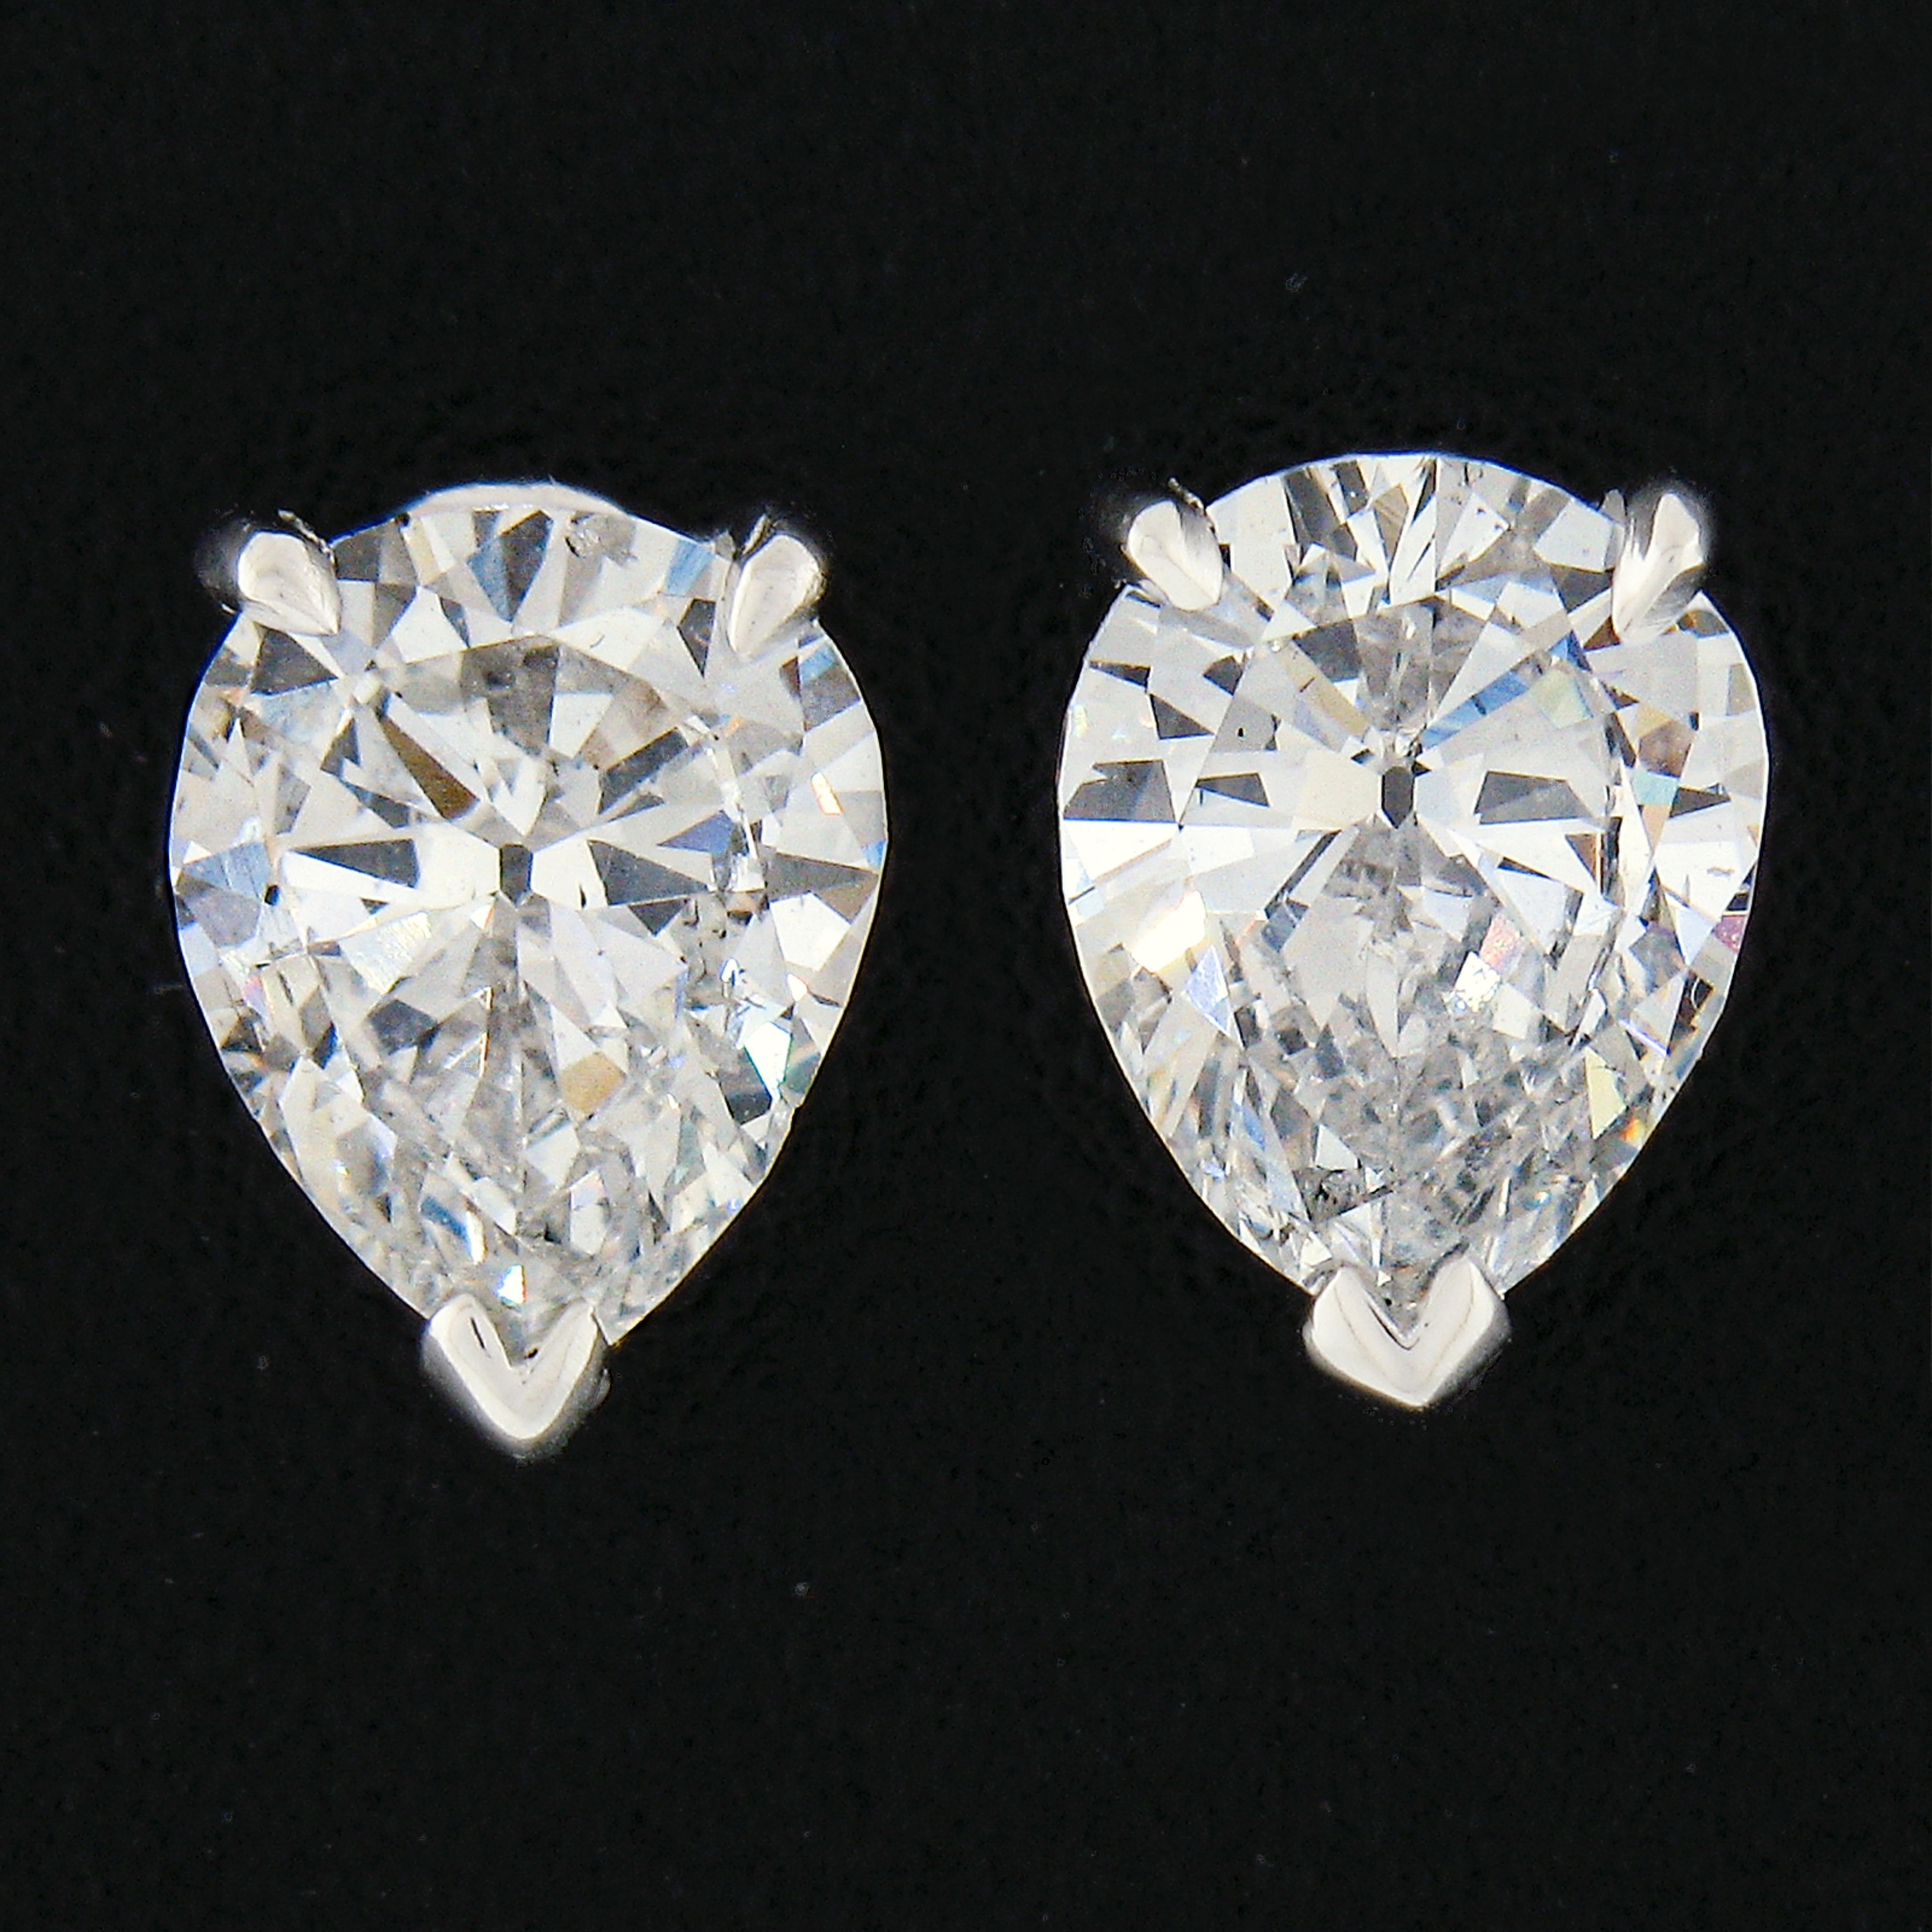 This stunning pair of diamond stud earrings was newly crafted from solid 950 platinum and features two exceptionally brilliant and fiery GIA certified OLD CUT pear brilliant diamonds. The diamonds total exactly 1.69 carats in weight with colorless